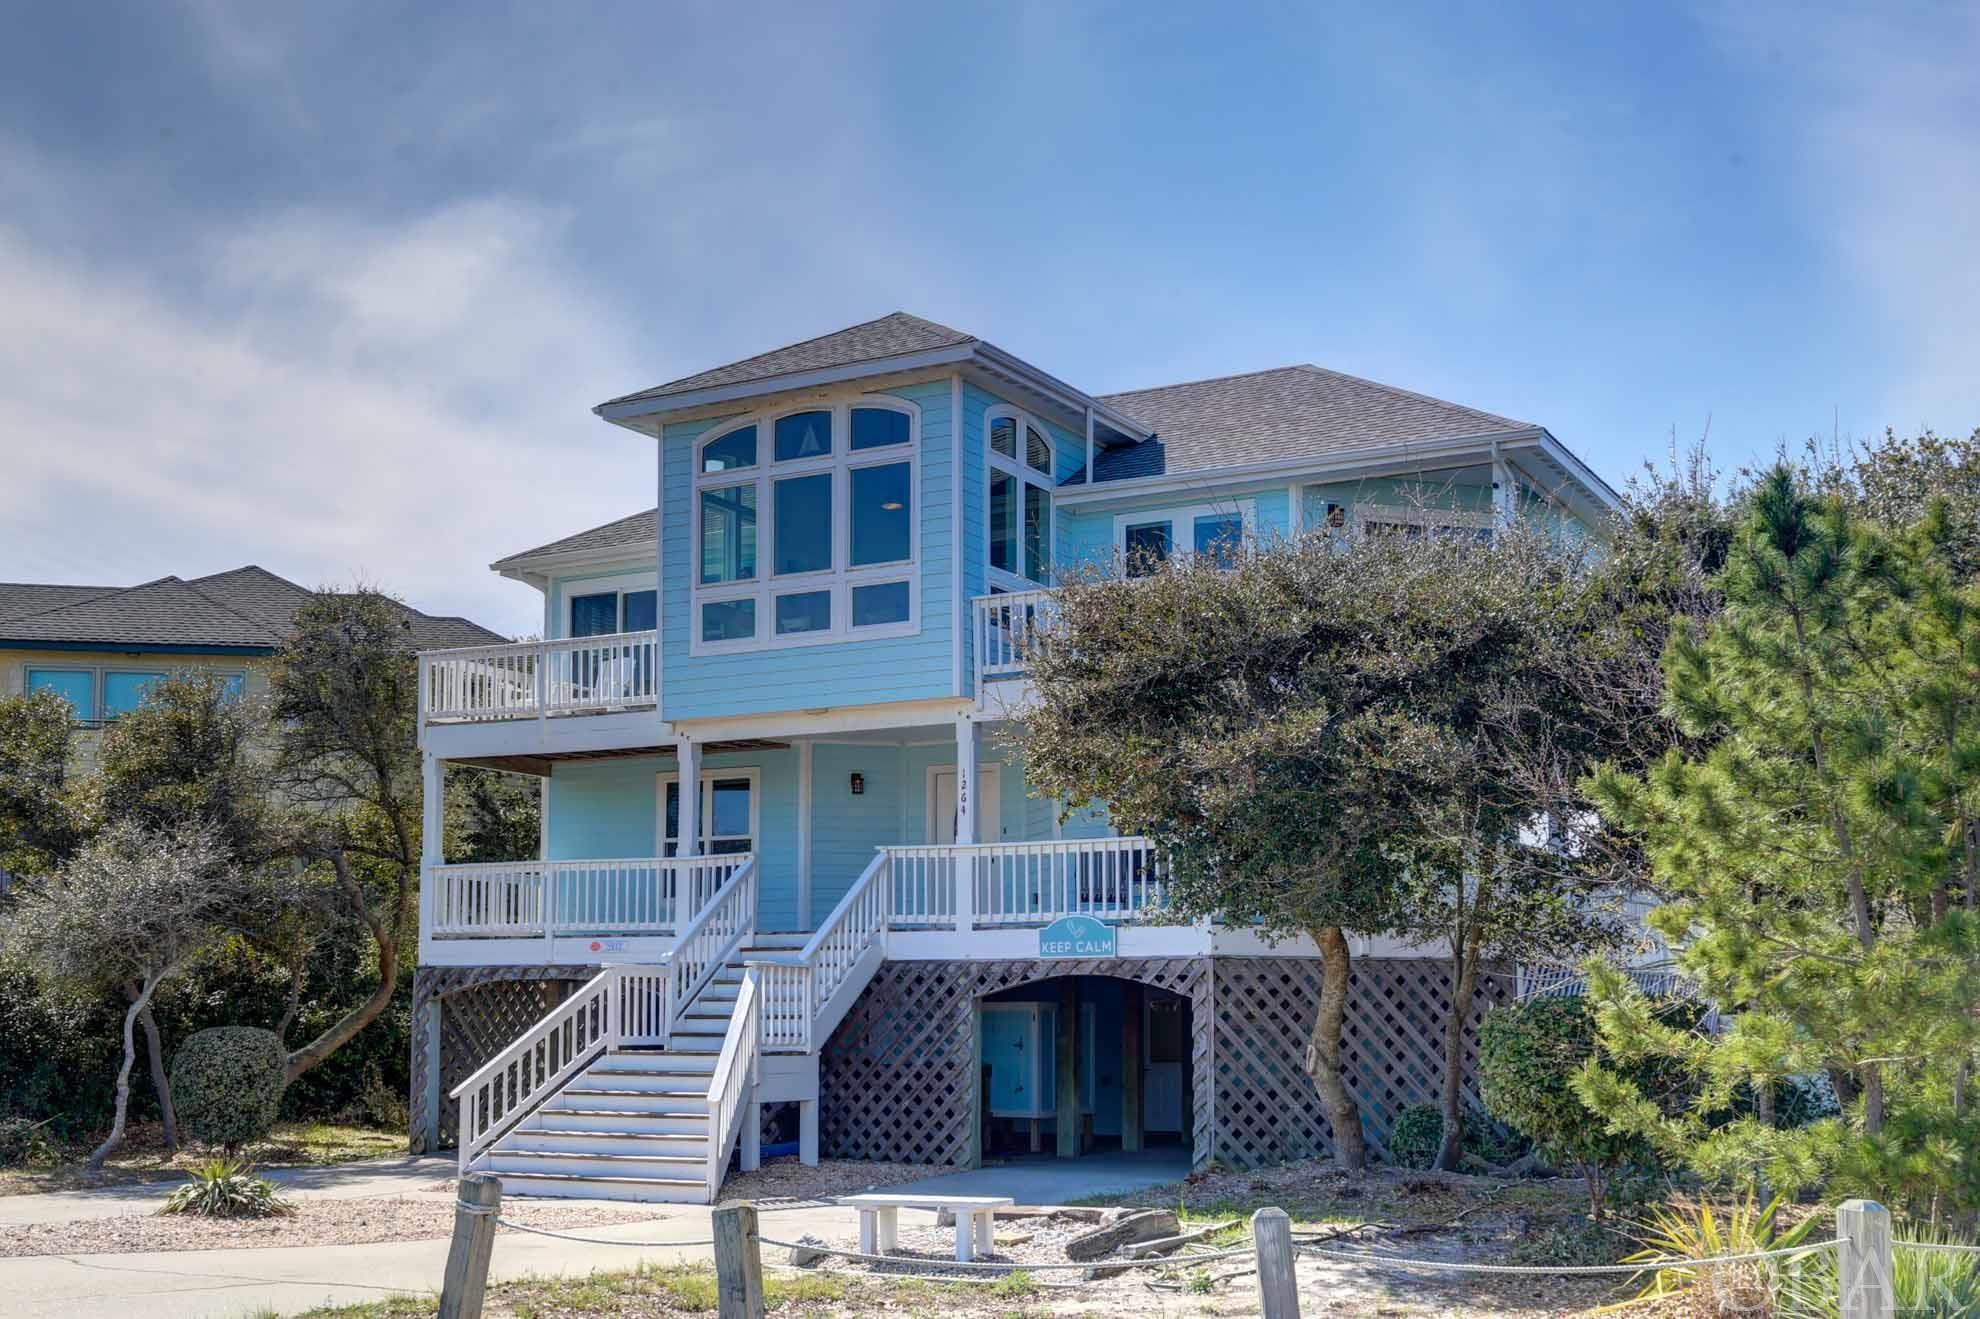 This Village of Ocean Hills, Semi Ocean Front home is a rare find. "Paws and Keep Calm" is absolutely ideal for the buyer looking for turnkey perfection located in the heart of Corolla! This completely upgraded and remodeled beauty is rental ready for the 2024 season.   This well laid out home is a favorite among guests and certainly appeals to the second home buyer looking for lots of space to spread out, expansive ocean views, incredible access to the beach and all of the amenities that Village of Ocean Hills offers. Nestled close to the Corolla estuary and the four wheel drive beaches, most famous for the majestic wild horses, the location is great for no matter what your interests are. Pristine, wide beaches that are quiet and private for the use of just the Village of Ocean Hills guests, it is no question why guests return year after year.   This home is well thought out in terms of layout. The top level (King) Master has sweeping views overlooking the ocean. Featuring built ins and a large private bathroom, it is bright and open. The **Brand New** remodeled kitchen is the perfect backdrop for entertaining and gathering for the whole family. The kitchen nook is bright and also features views of the ocean! The living room offers up a wet bar, plenty of gathering space with a seating to enjoy the best ocean views imaginable. Immediately off of the living room, enjoy decks for early morning coffee and late evening cocktails with calming views. There is a screened in porch on the top level for ping pong and a half bath at the top of the stairs! The mid level has four additional, well appointed bedrooms and two full bathrooms.   On the ground level, you will find an additional bedroom (and full bathroom) and rec room with a wet bar.   The game room opens up to a private (heated) pool, hot tub, grassy area for the pups and plenty of room for seating.   The Village of Ocean Hill Community offers: Oceanfront Pool (with bathrooms) Lakefront Pool (with bathrooms) Tennis Fitness Center Basketball court Sports Courts Catch and Release fishing  With lots of community amenities, major updates and solid rental income, this home checks all of the boxes!